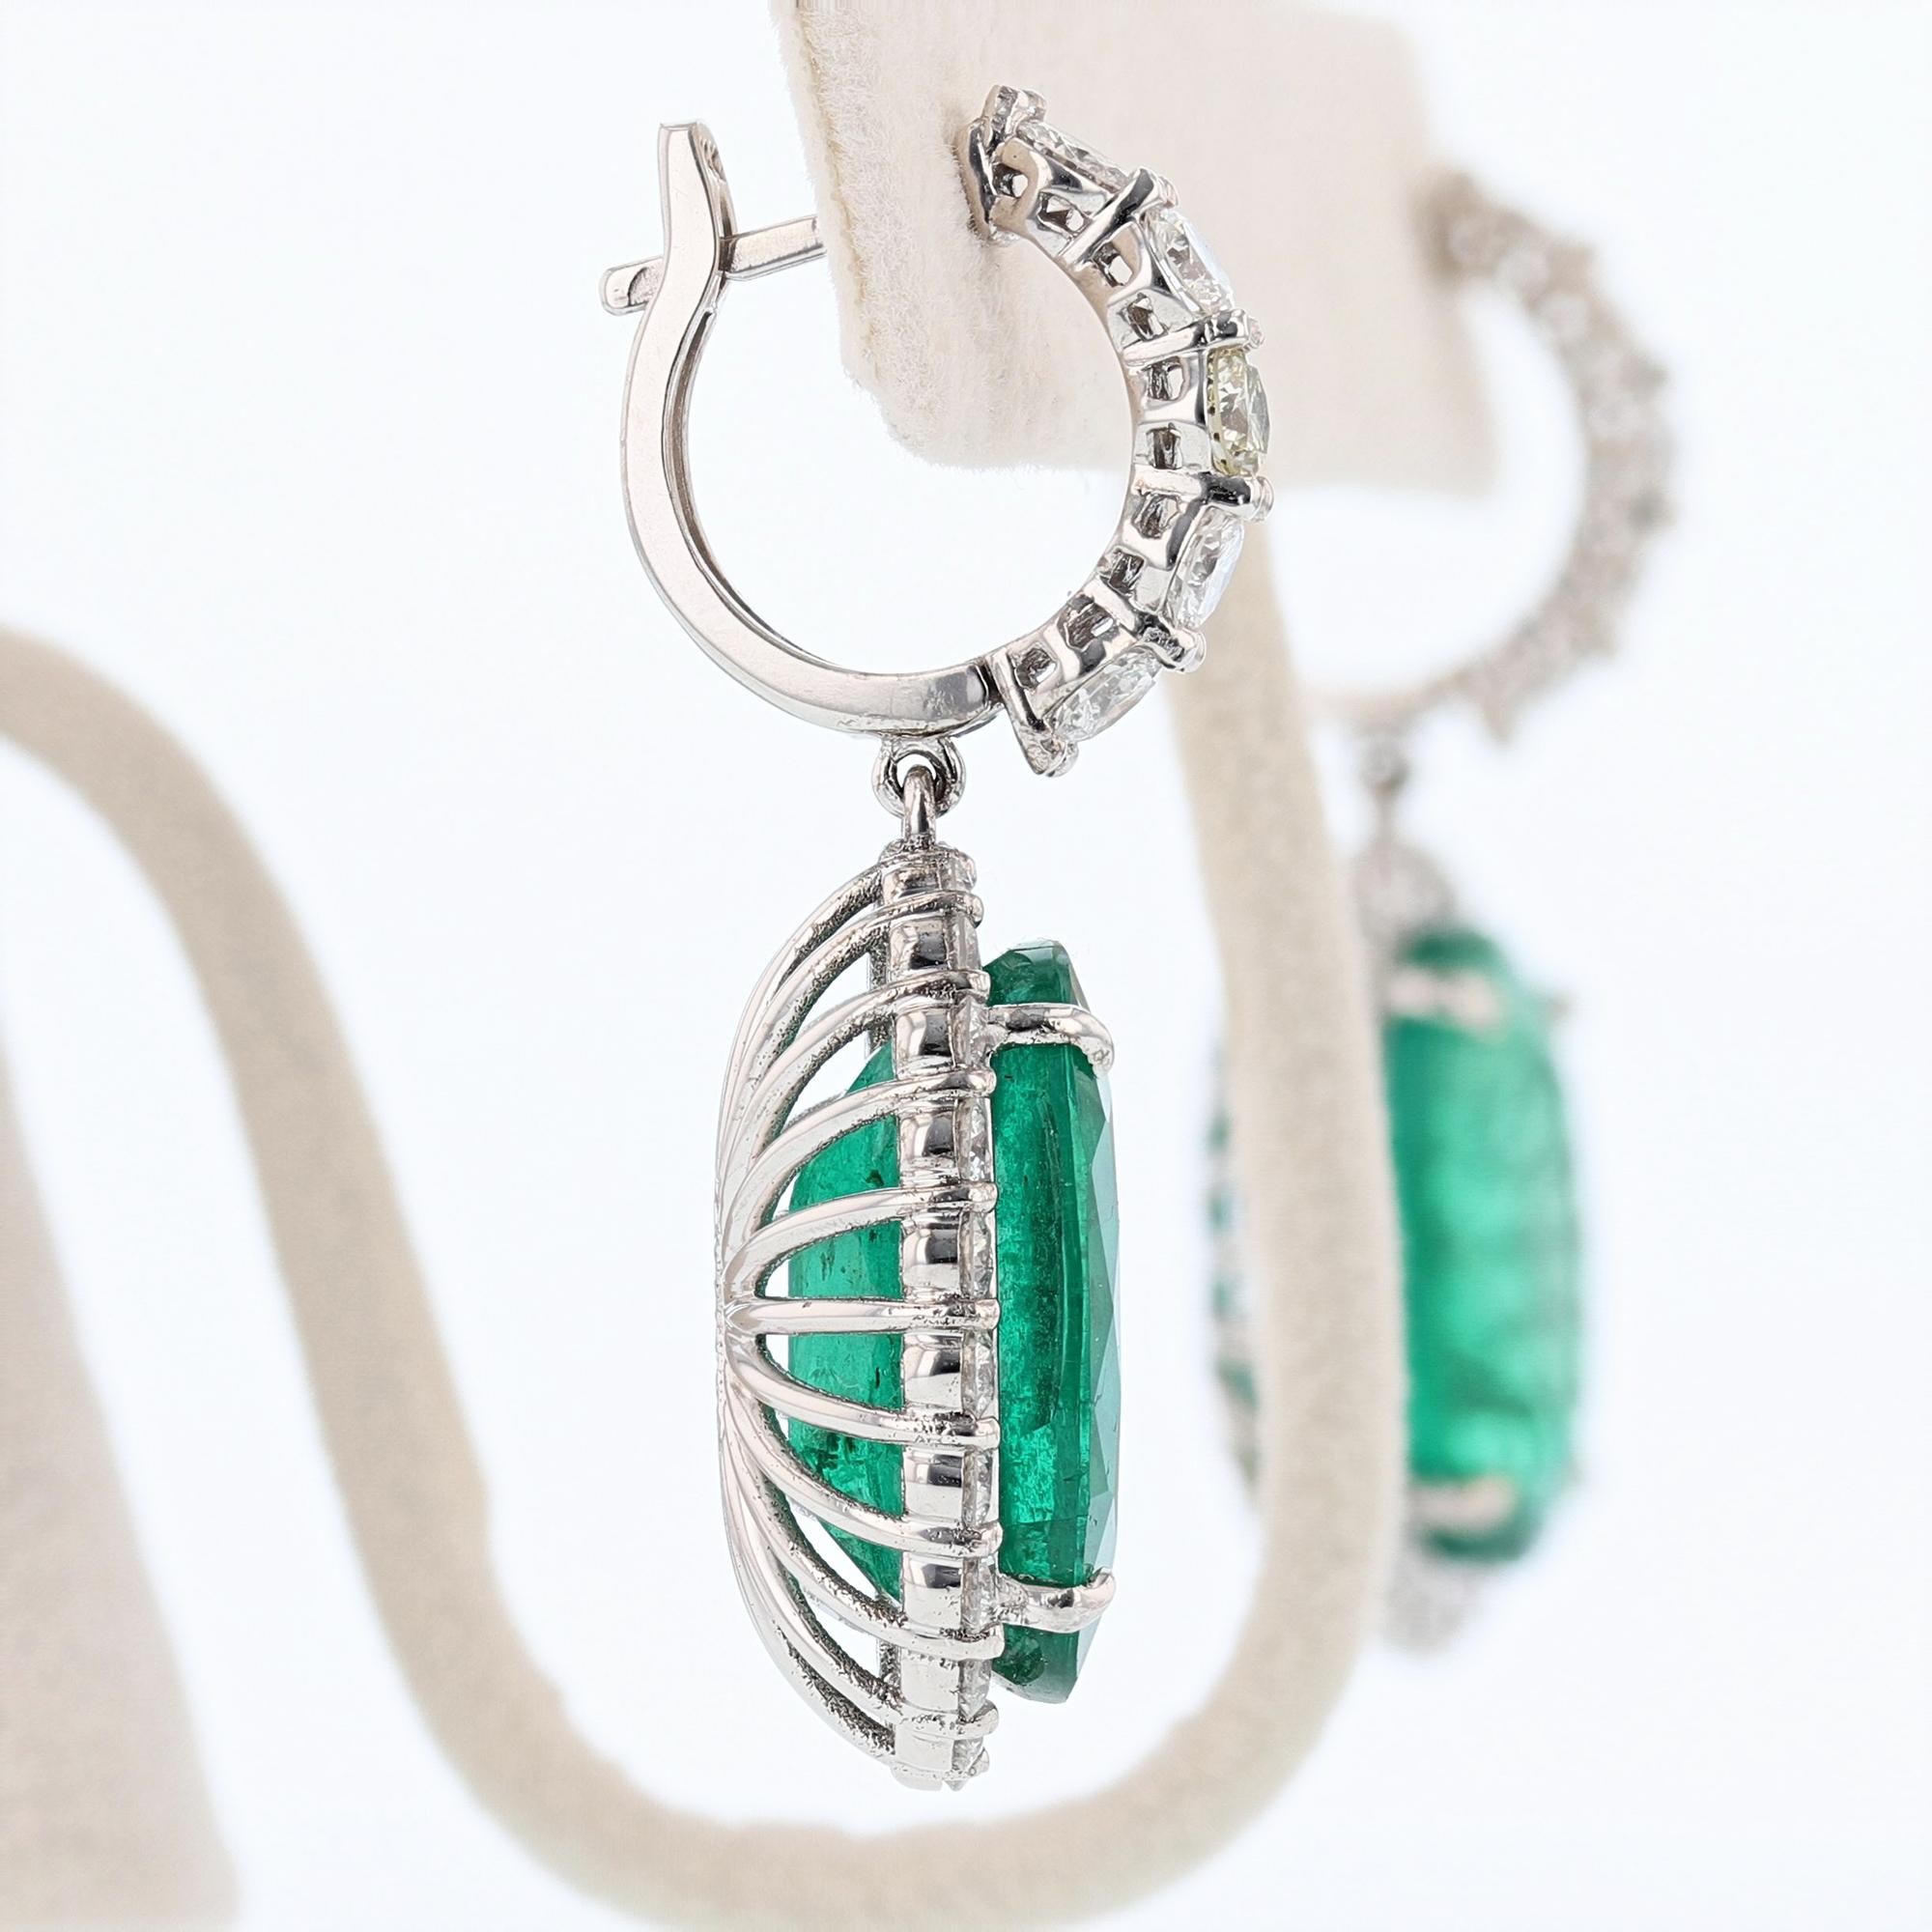 These earrings are made of 14k white gold and features 2 Oval Shape Green Emeralds weighing a combined total weight of 24.88ct, prong set. The Emeralds are GIA Certified. The first Emerald is an oval shape and weighs 12.26ct. The GIA Certification